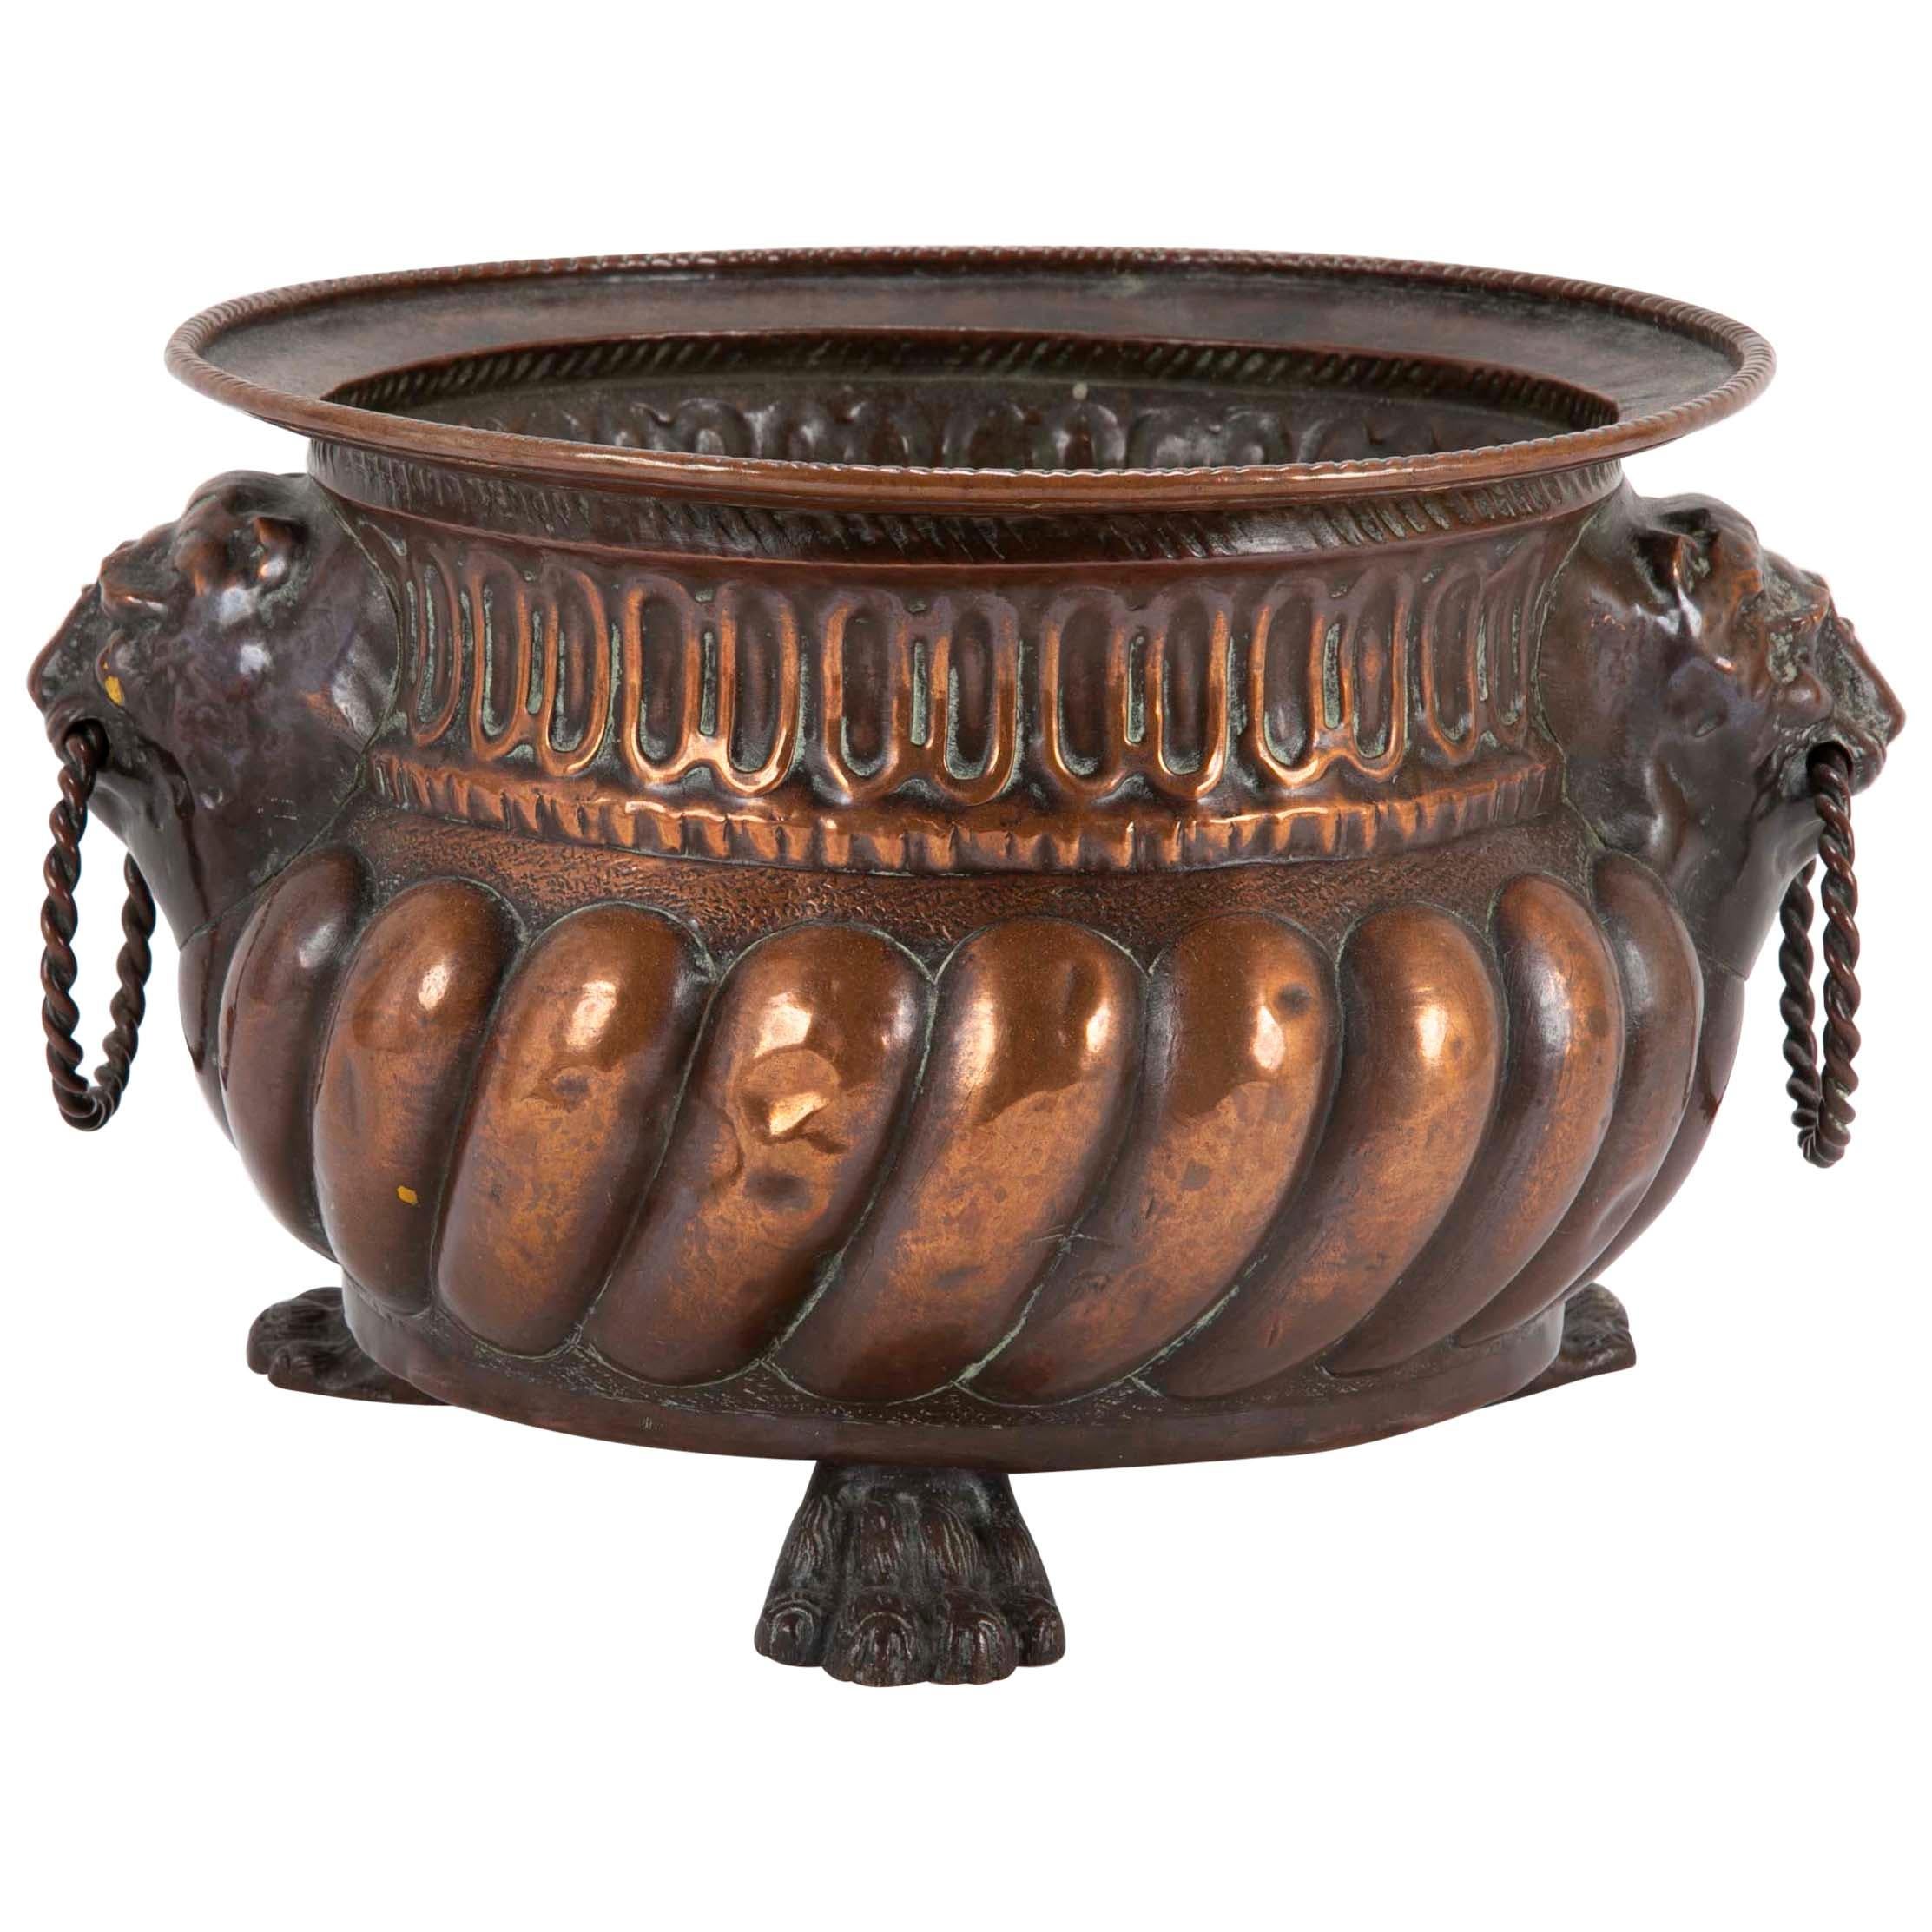 Dutch Patinated Copper Jardiniere in the Baroque Style For Sale